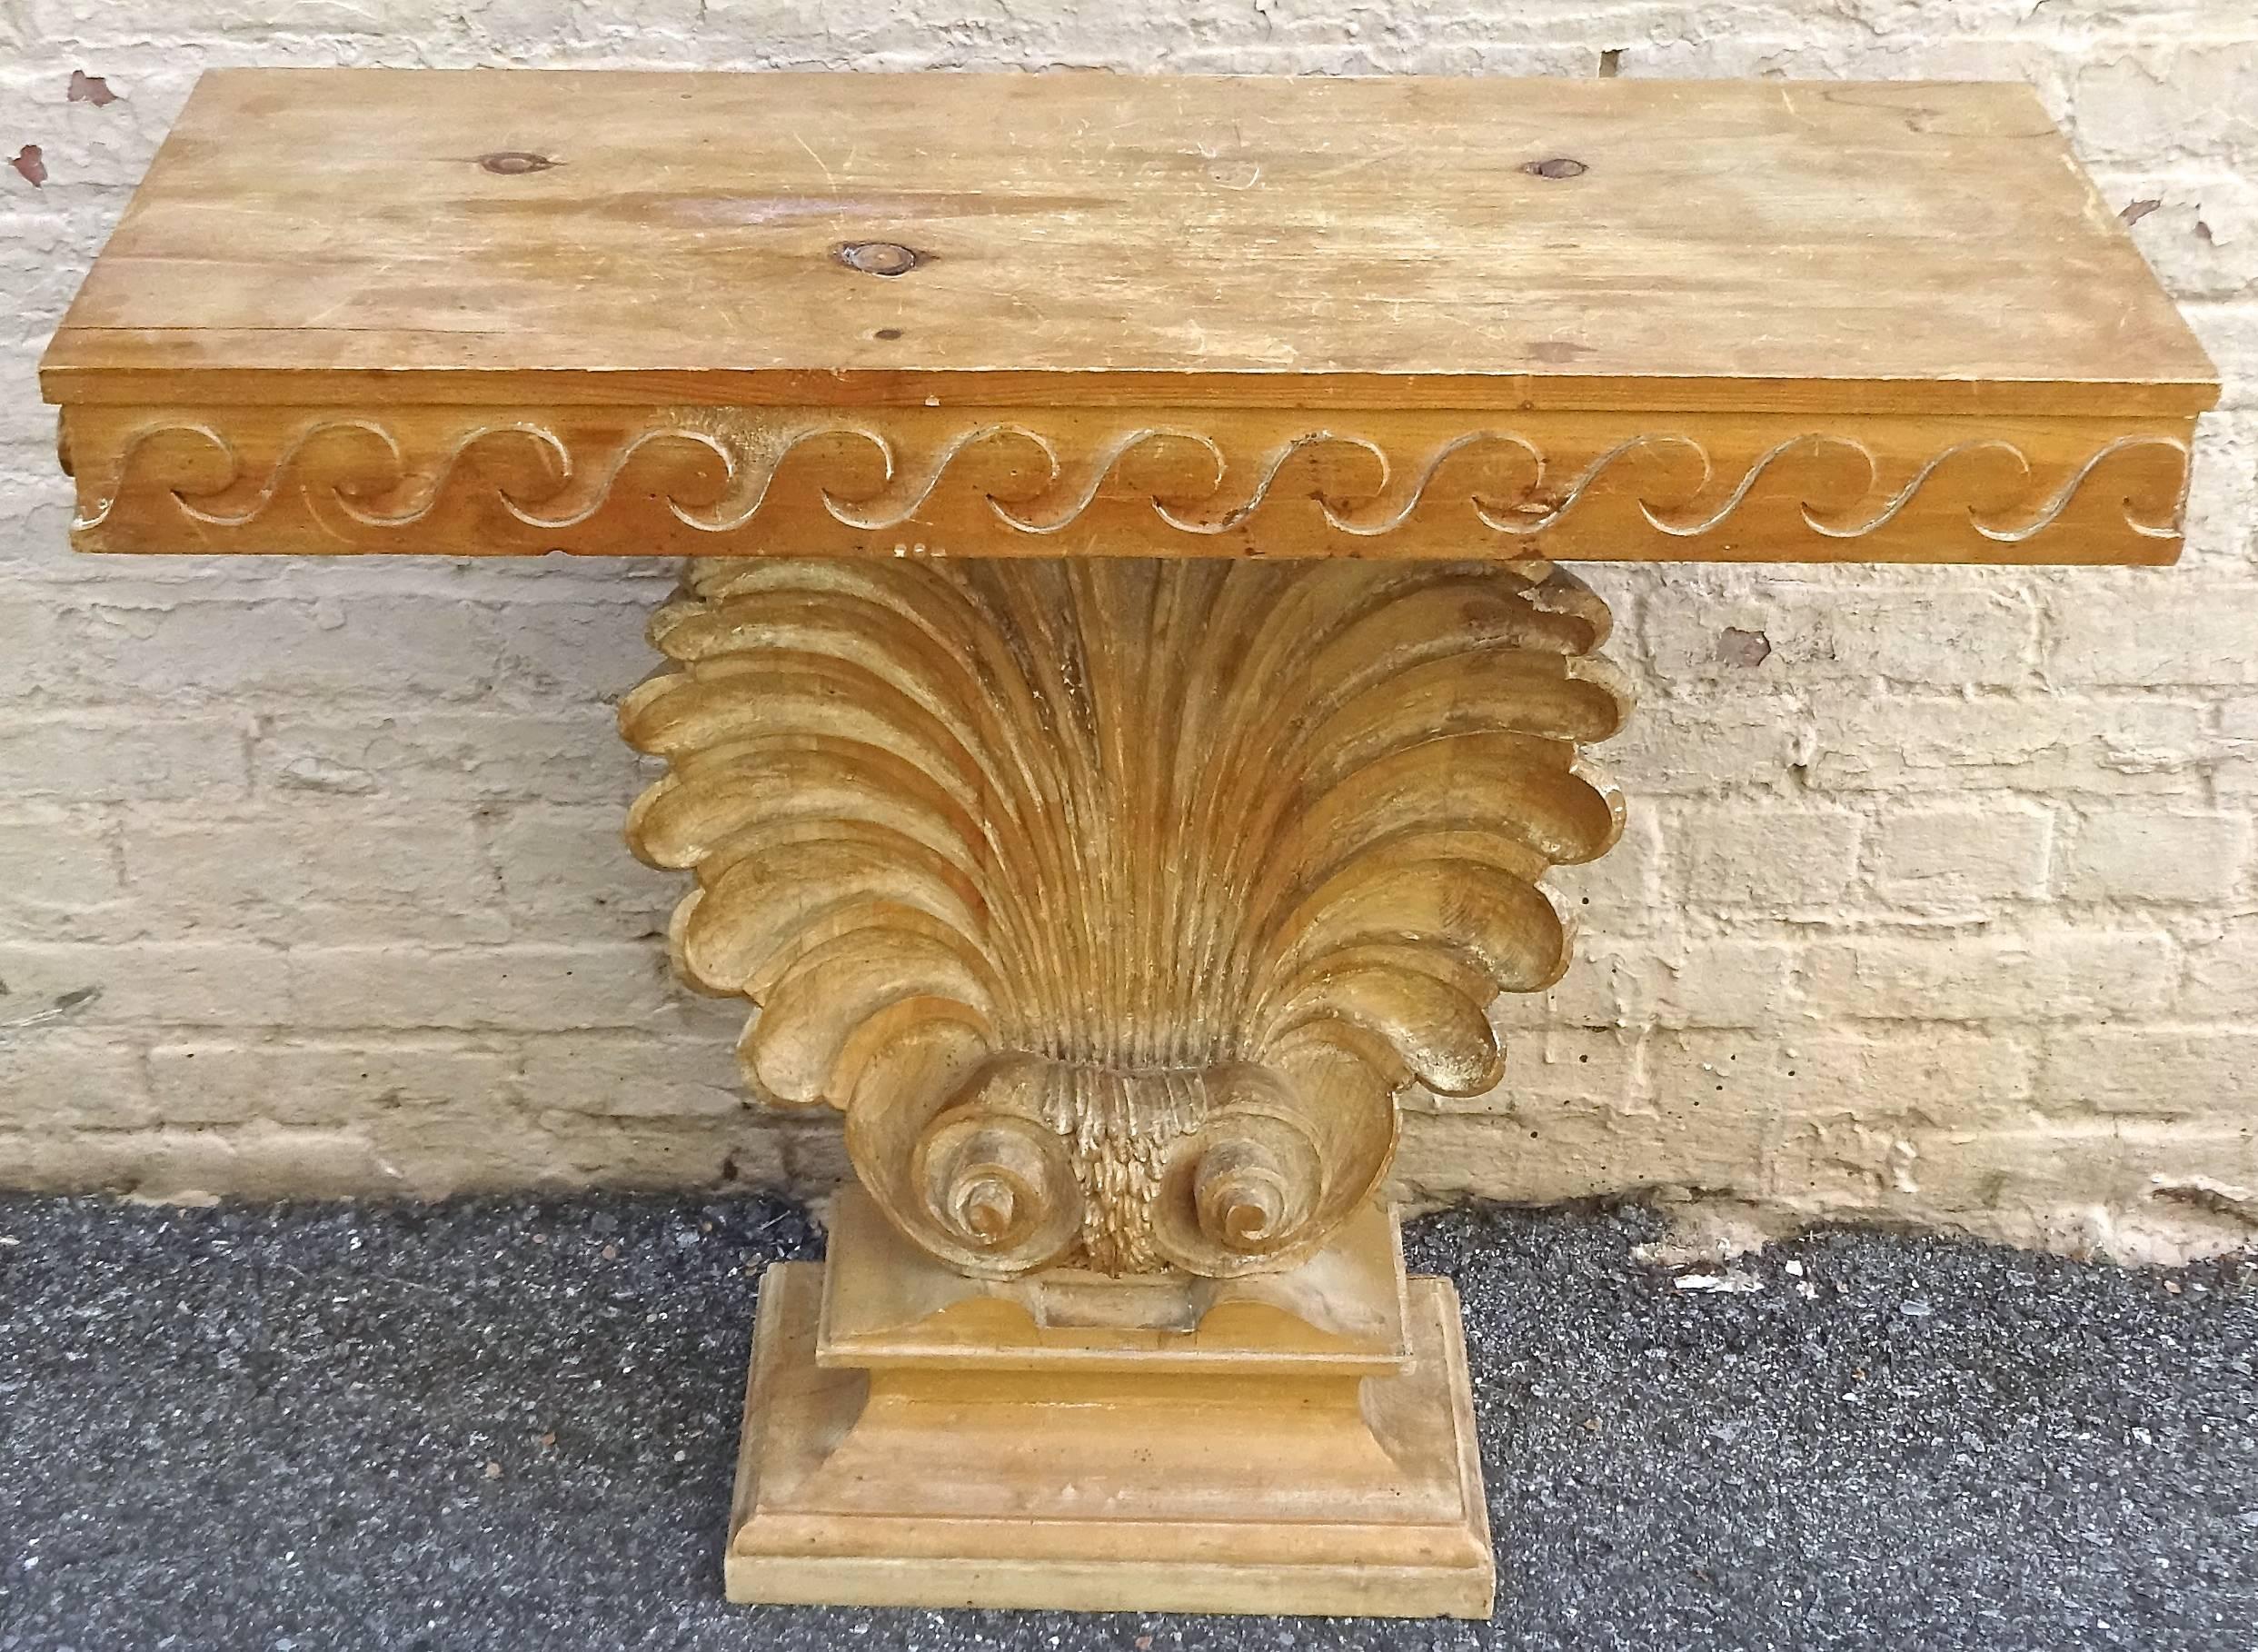 Neoclassical 1930s Edward Wormley for Dunbar carved shell console table.